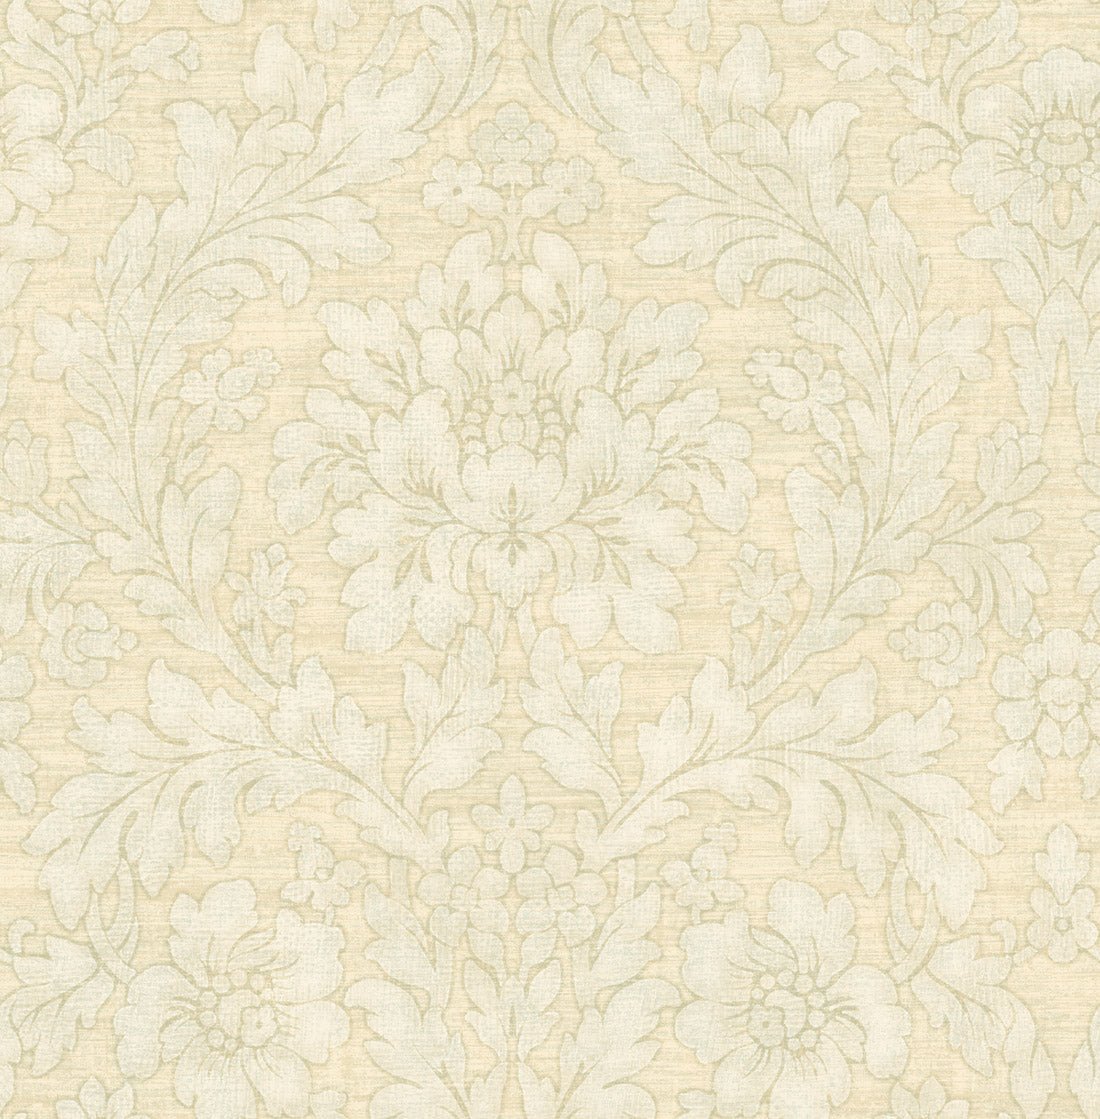 Luxury Traditional Wallpaper Patterns - Cole & Son